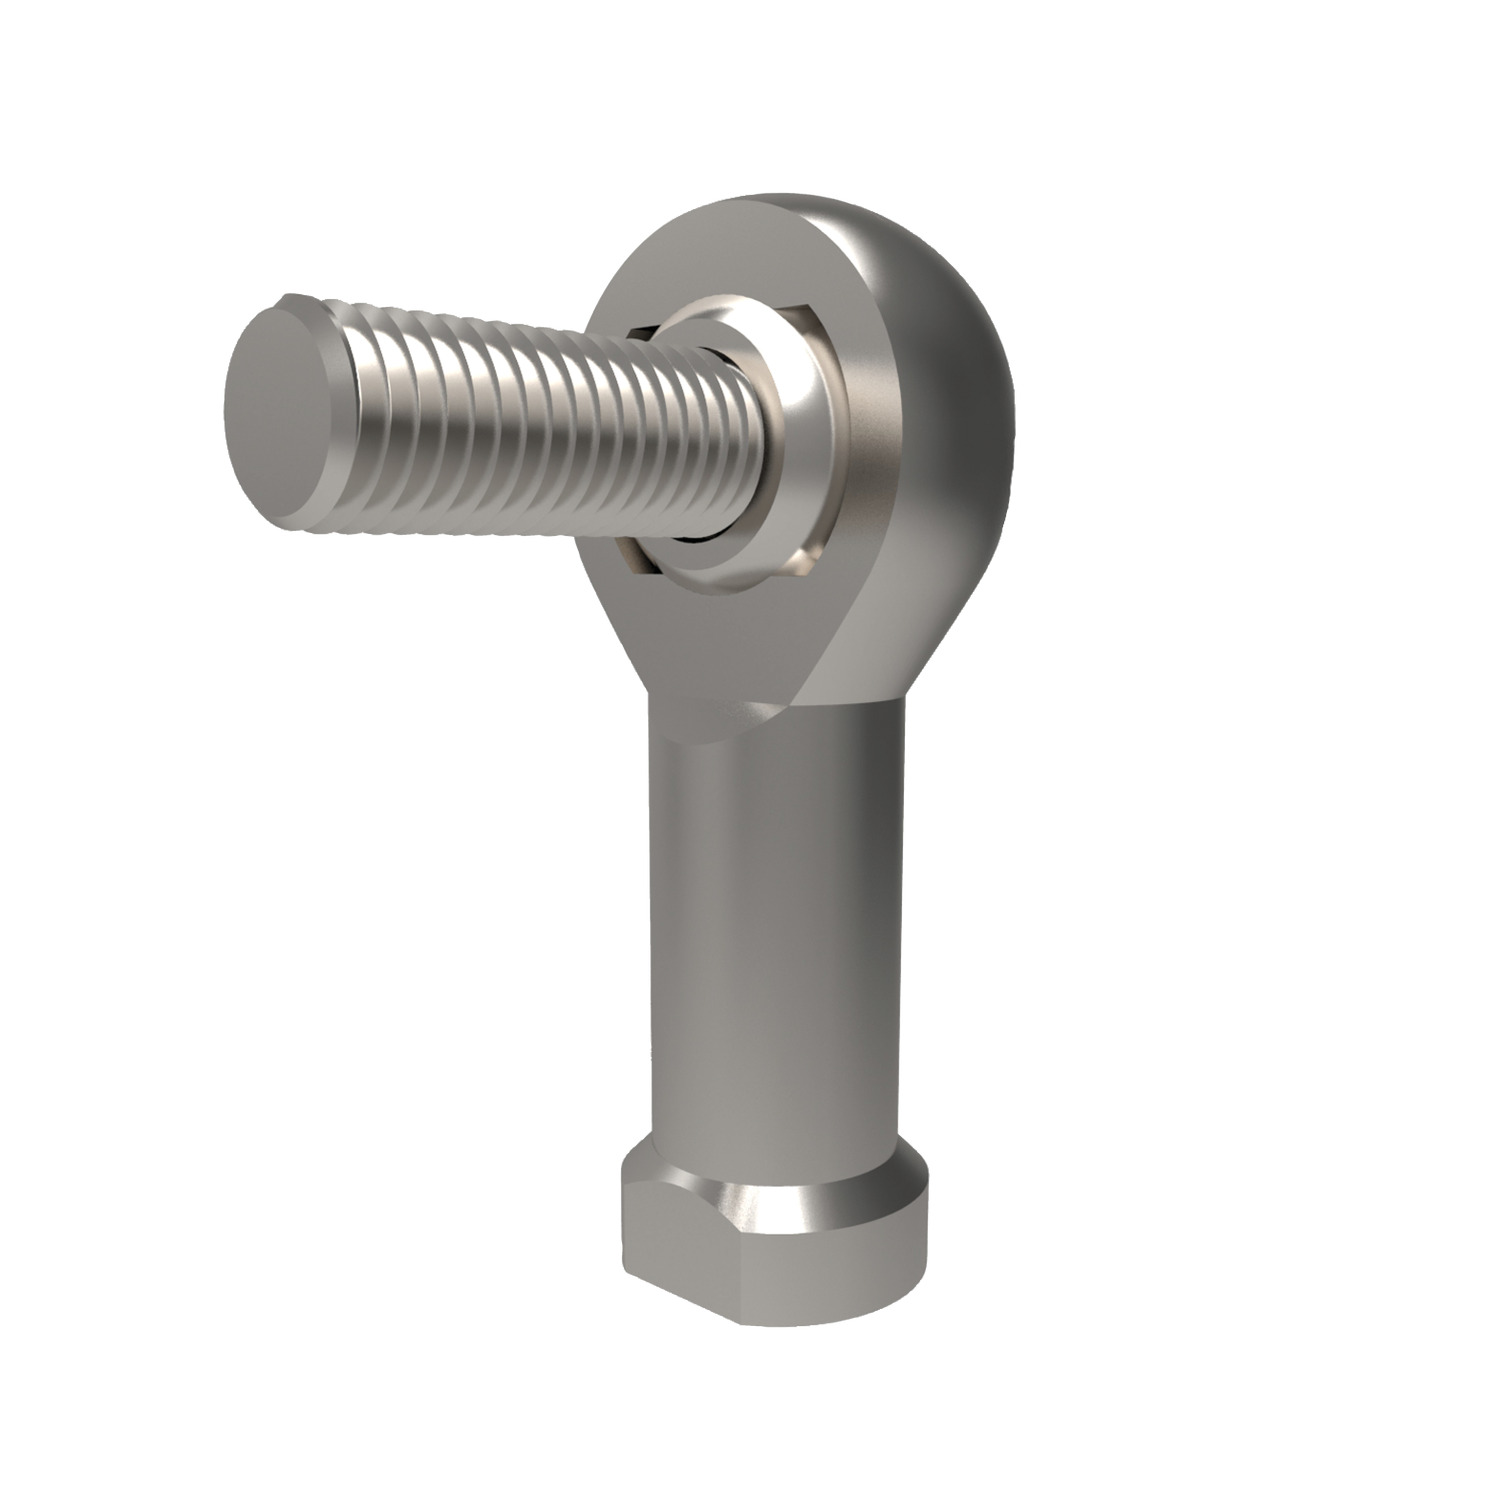 Rod End with Stud - Female Maintenance free. Sizes according to DIN ISO 12240-4 series K